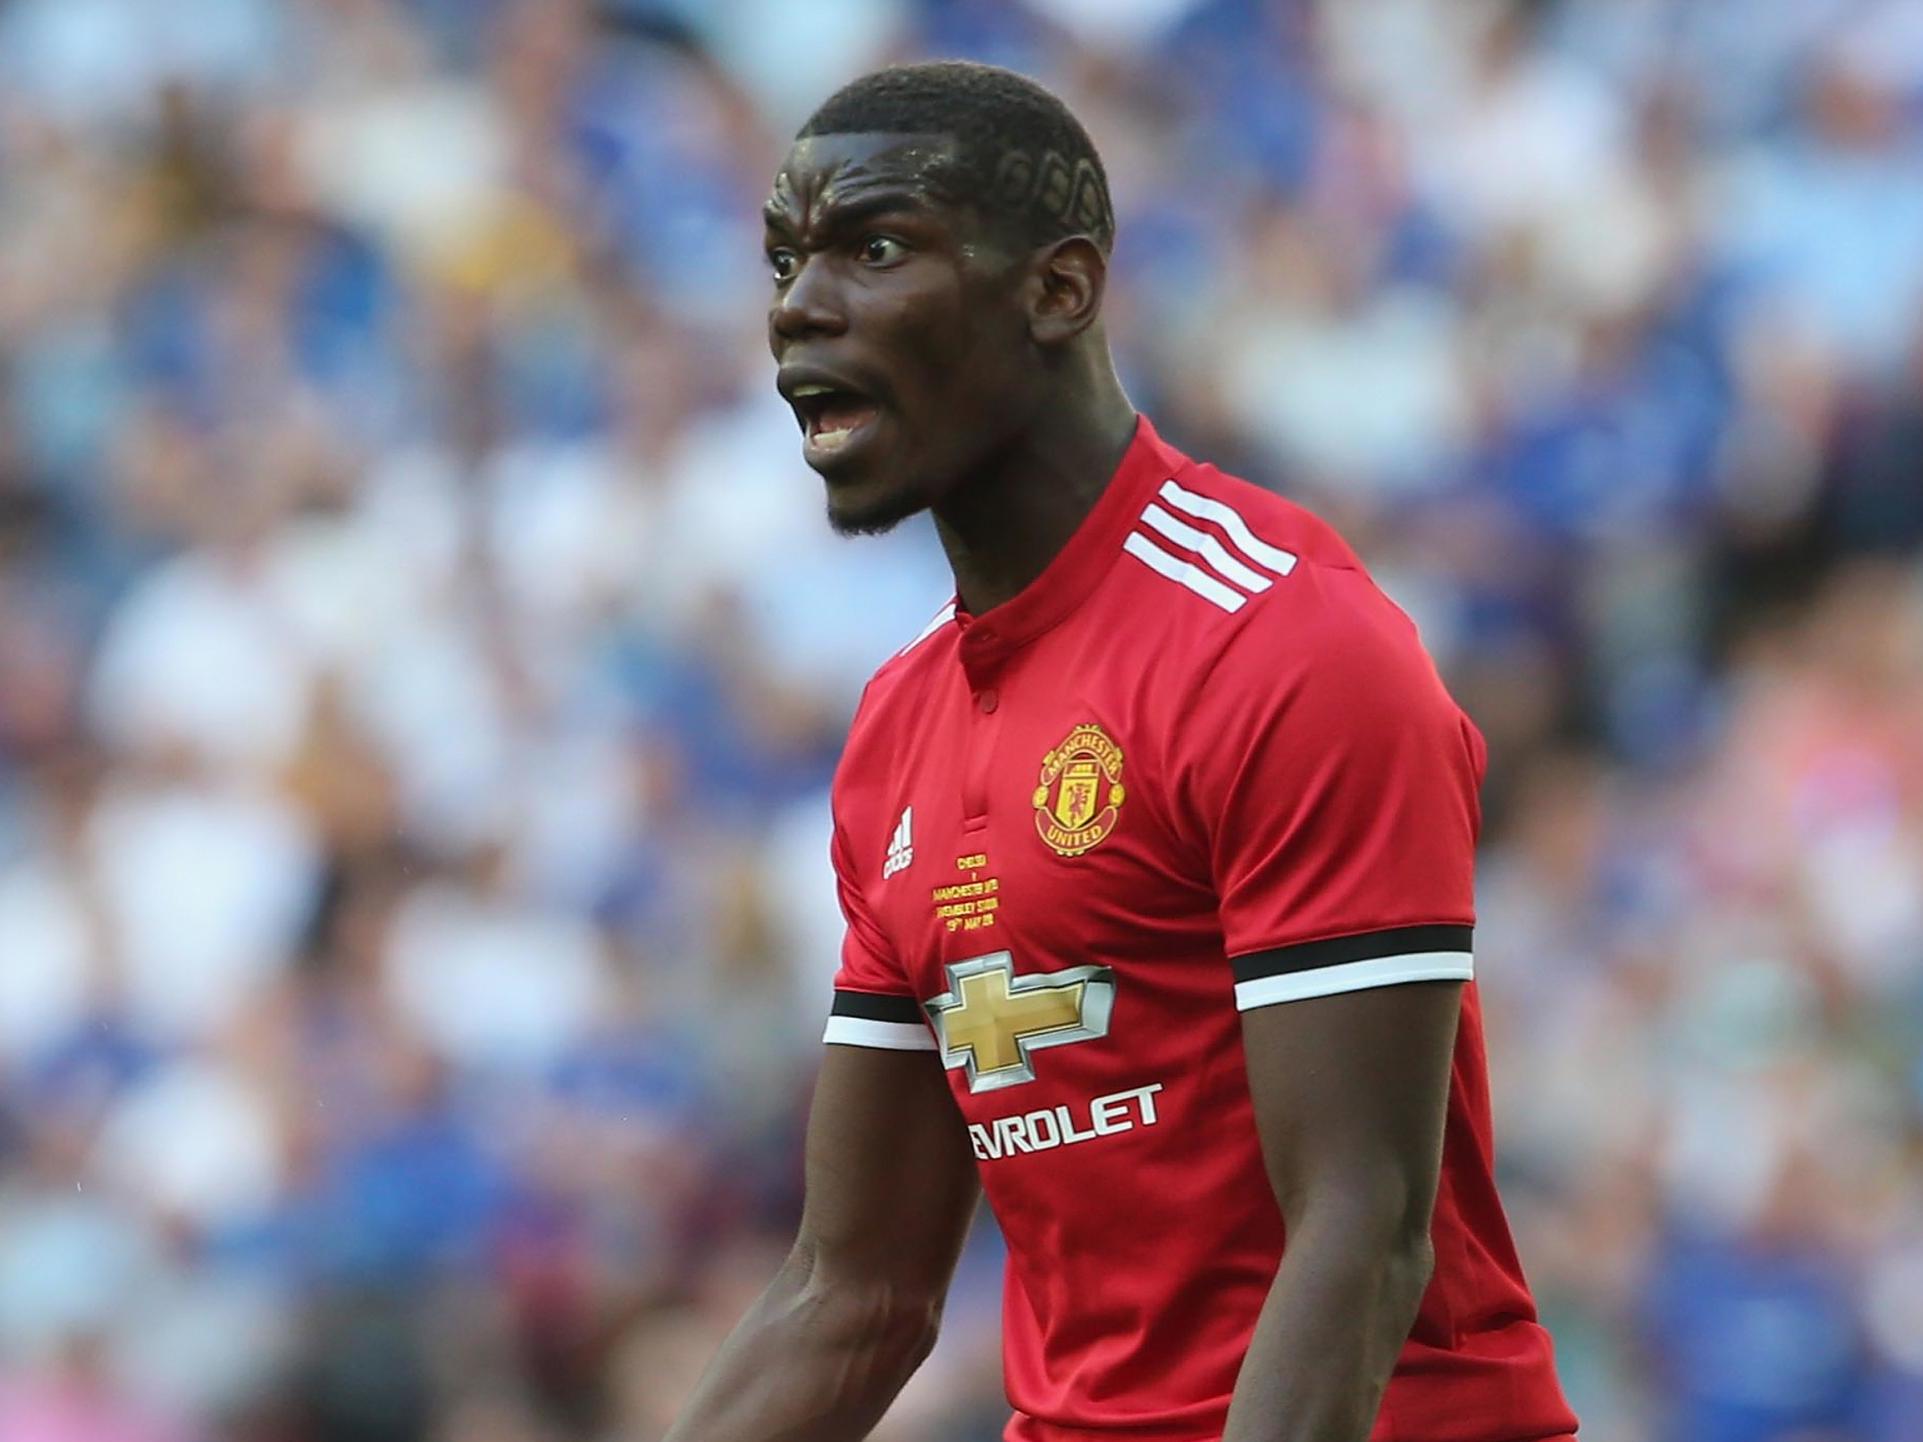 Transfer news, rumours - LIVE: Paul Pogba wants to leave Manchester United, Kepa and Mateo Kovacic to Chelsea, Jack Grealish to Spurs plus Arsenal, Liverpool and latest gossip